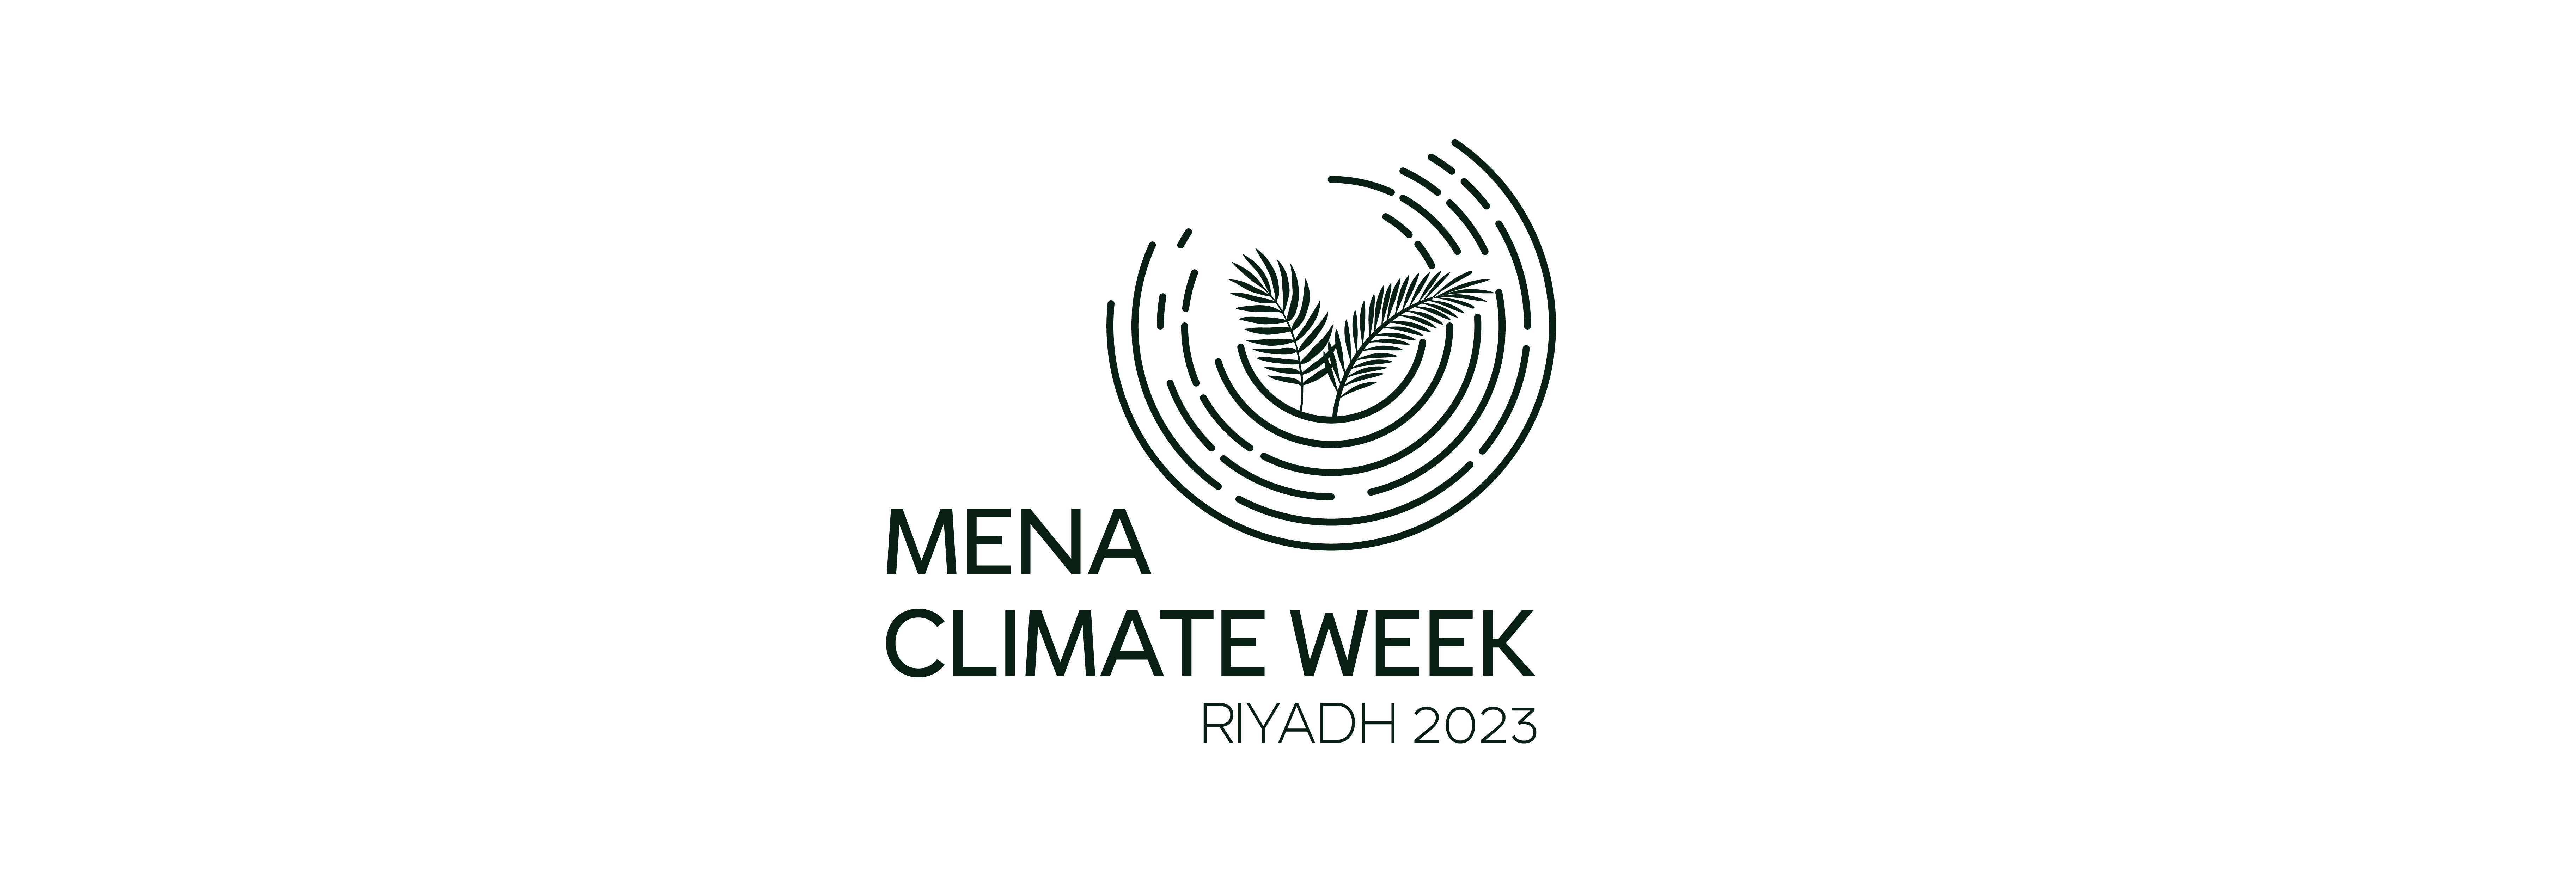 Record-Breaking MENA Climate Week Reflects Region’s Commitment to Inclusive Global Climate Action Ahead of COP28